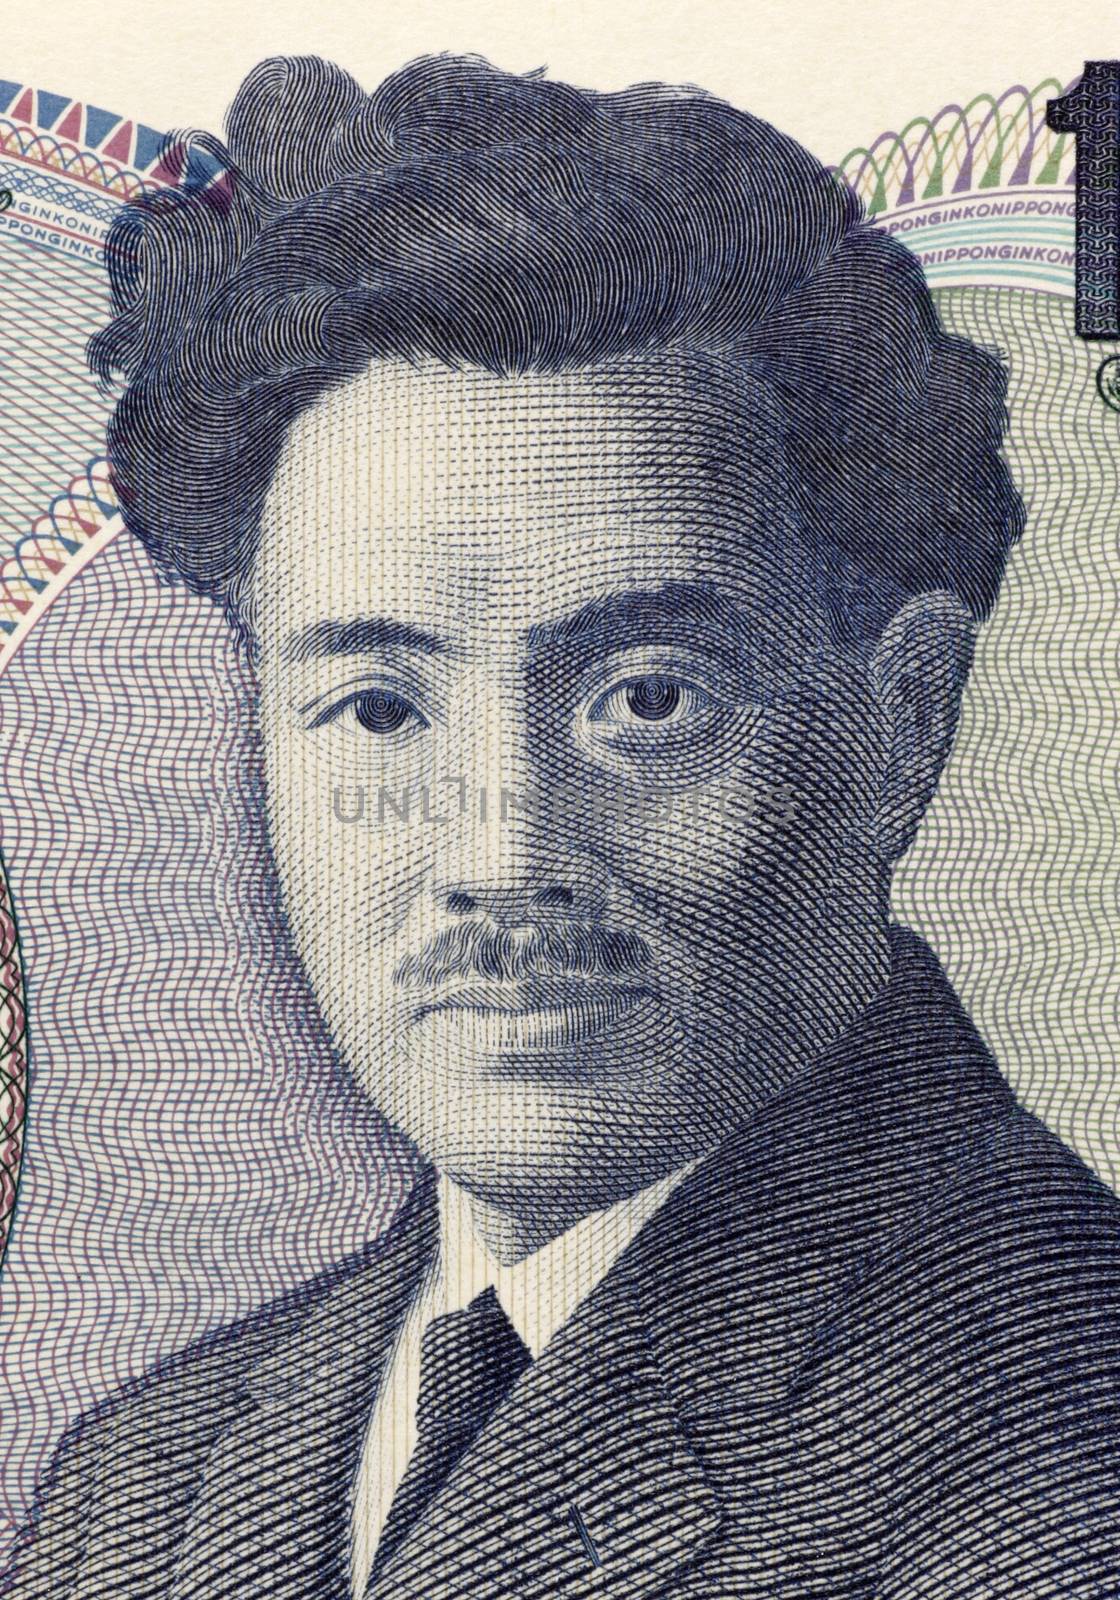 Hideyo Noguchi (1876-1928) on 1000 Yen 2011 banknote from Japan. Japanese bacteriologist who in 1911 discovered the agent of syphilis as the cause of progressive paralytic disease.